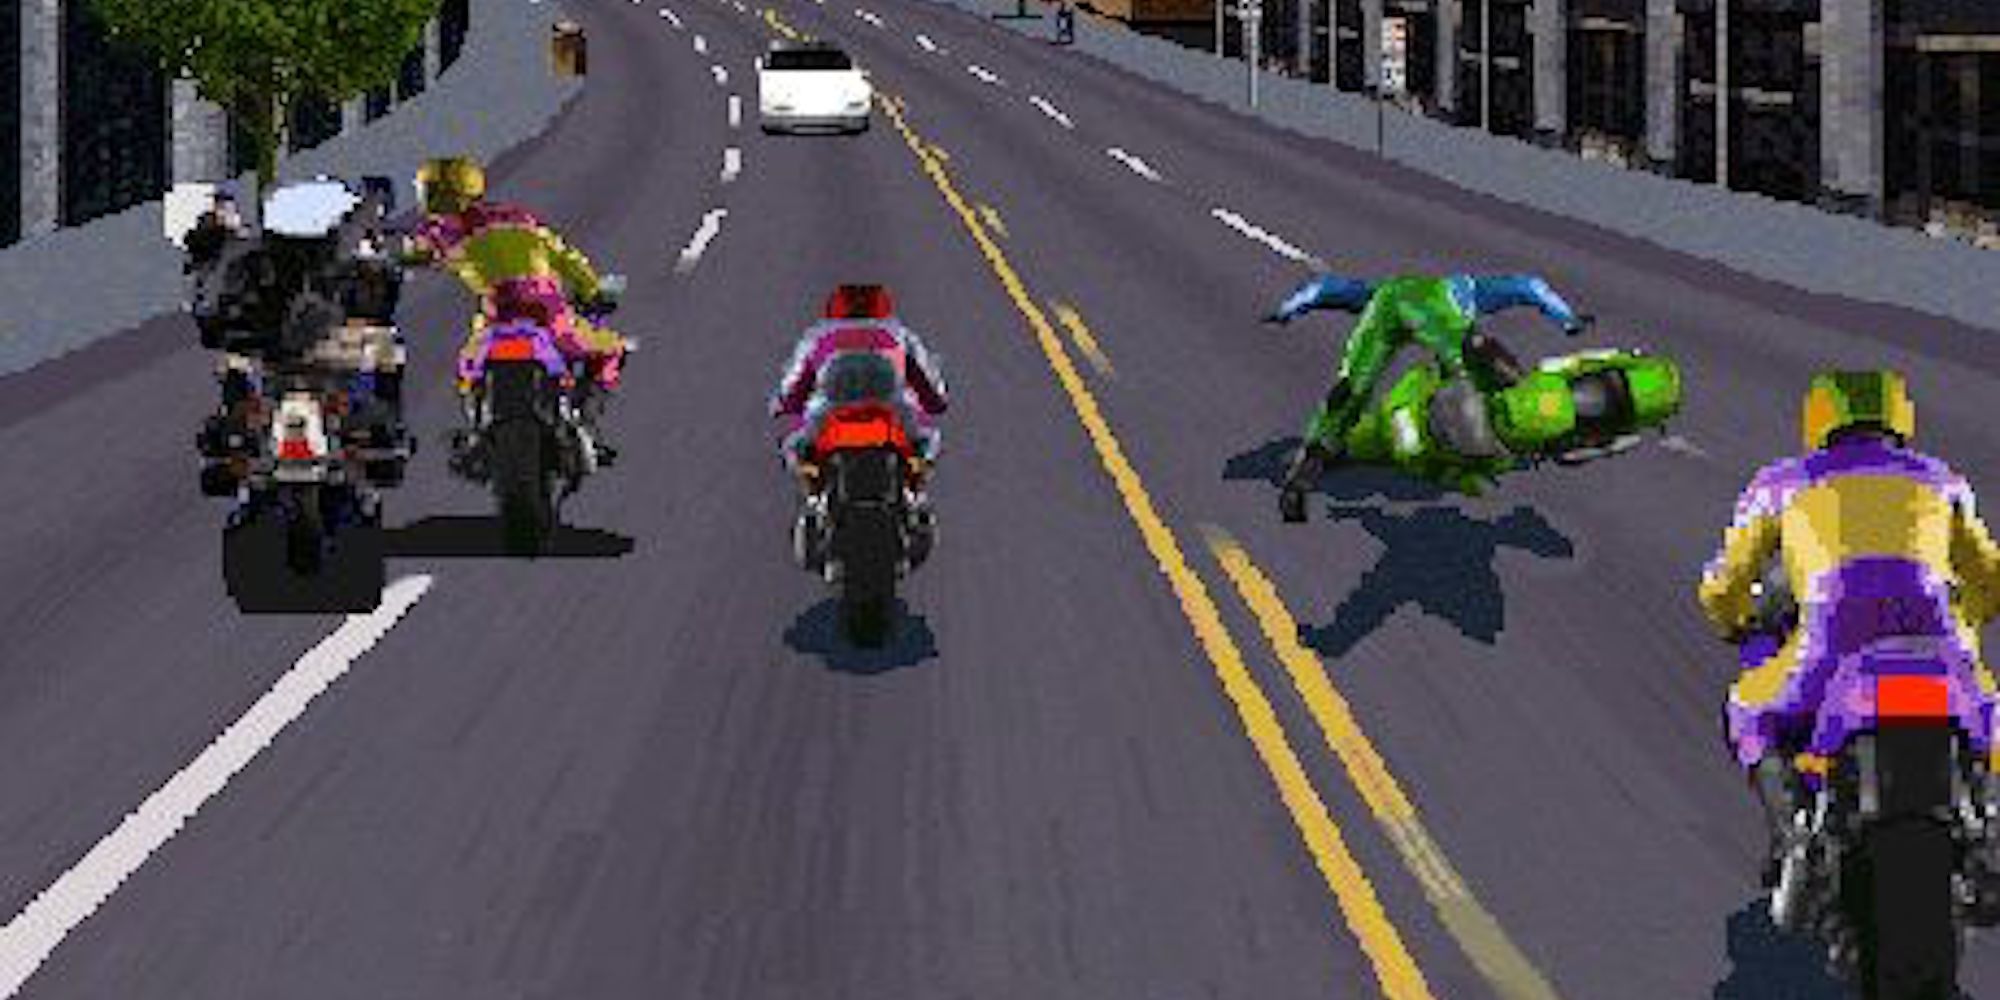 bikers race down the road in oncoming traffic taking each other out in Road Rash